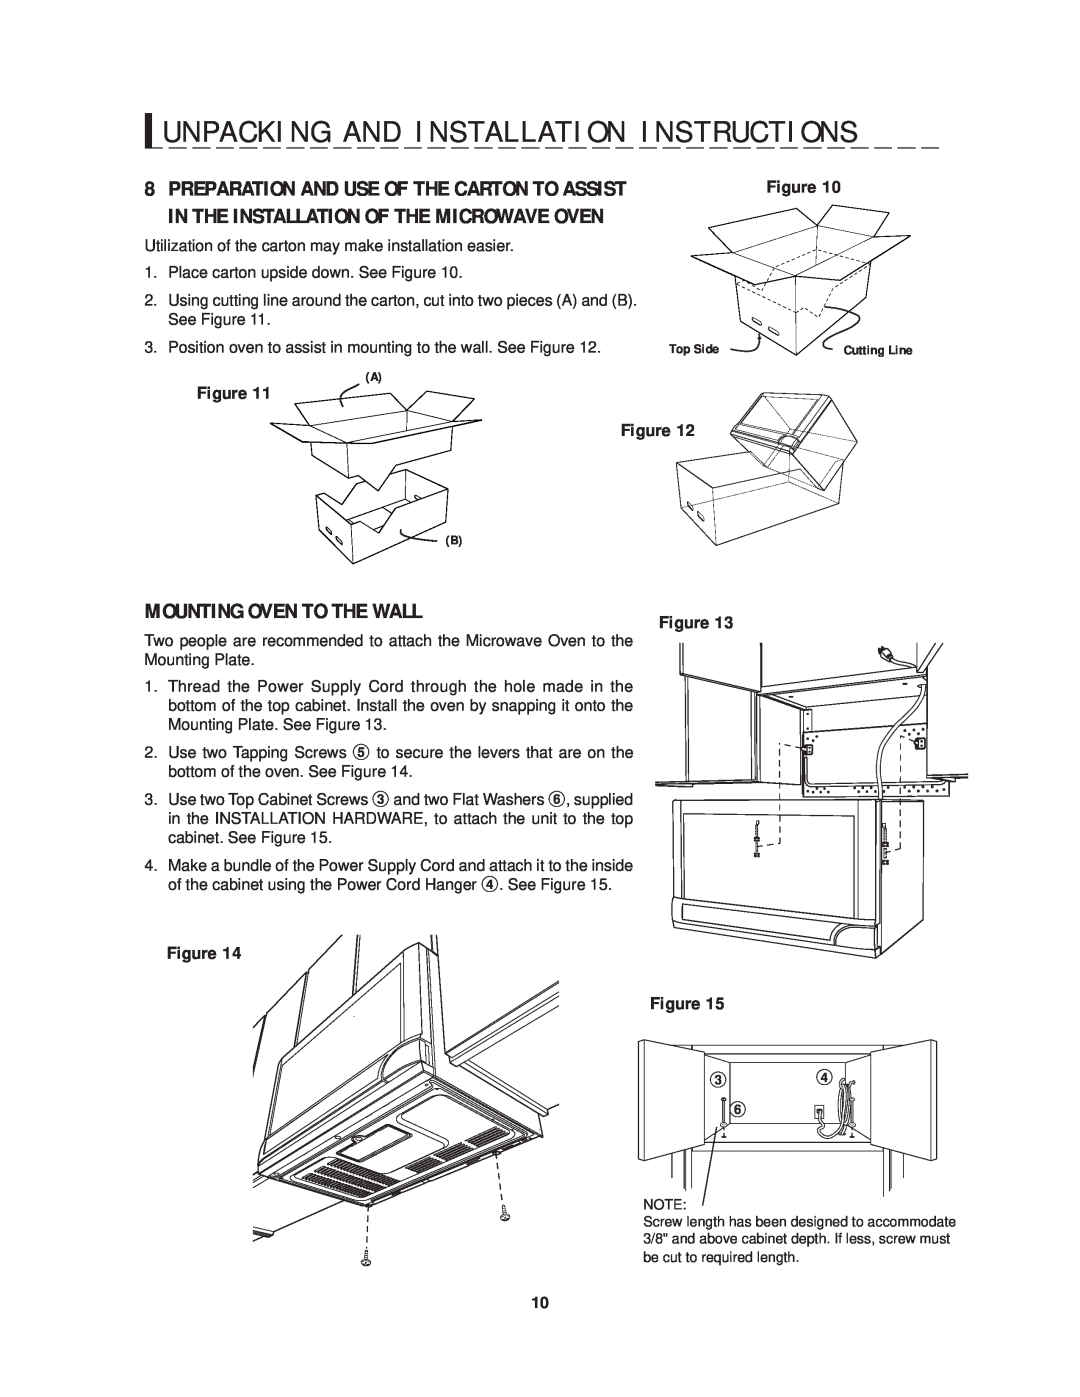 Sharp R-1214 operation manual Mounting Oven To The Wall, Preparation And Use Of The Carton To Assist 